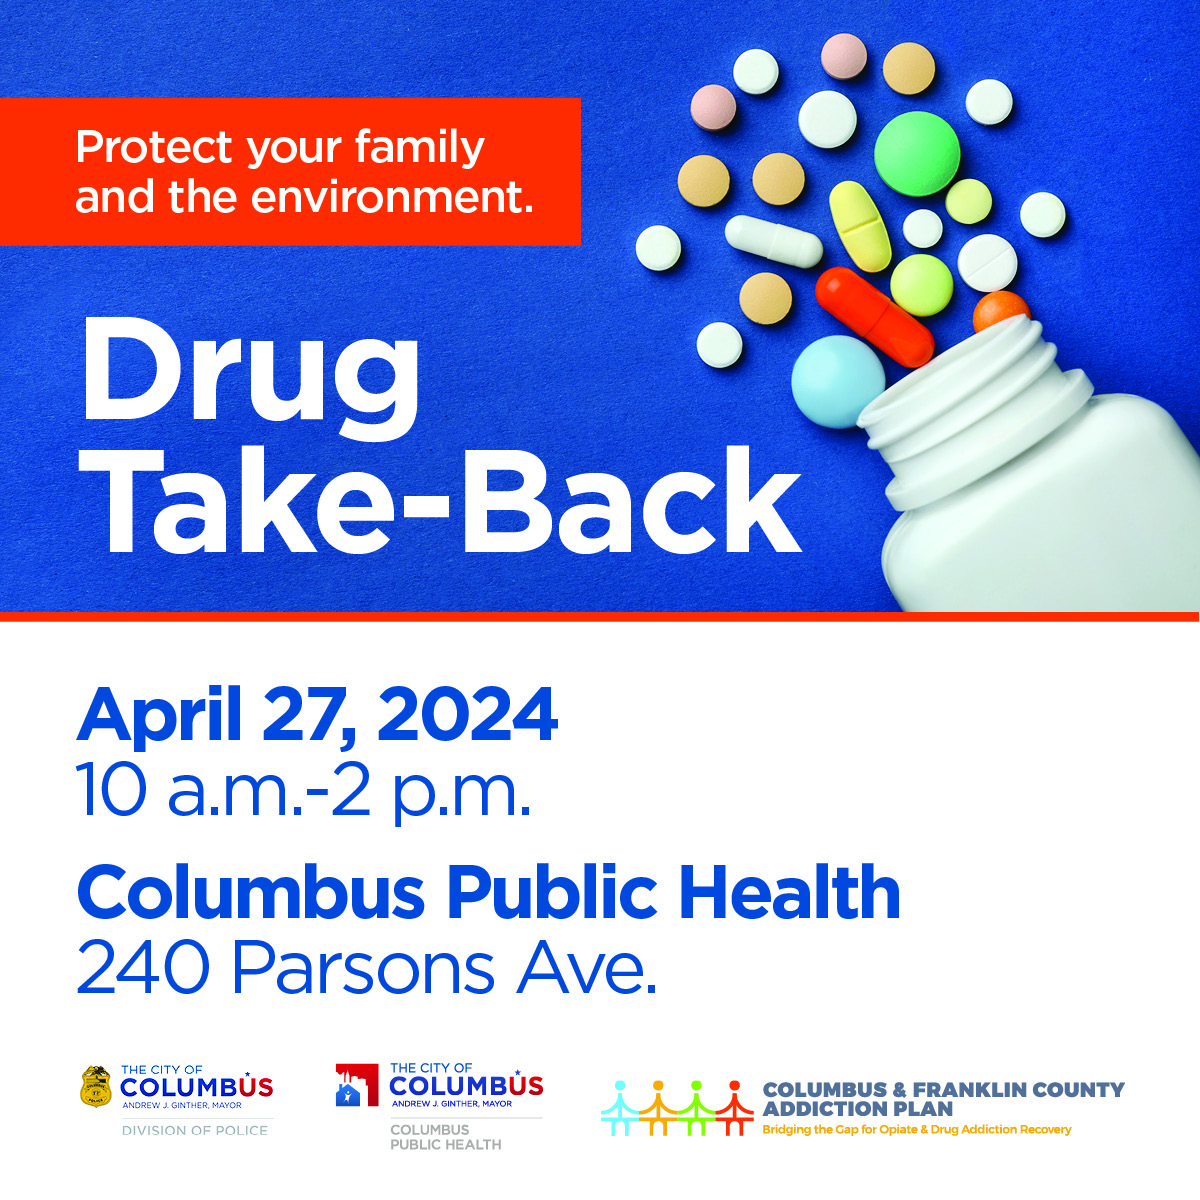 Drop off unused or unwanted medicine this Saturday from 10 a.m. to 2 p.m. at Columbus Public Health.